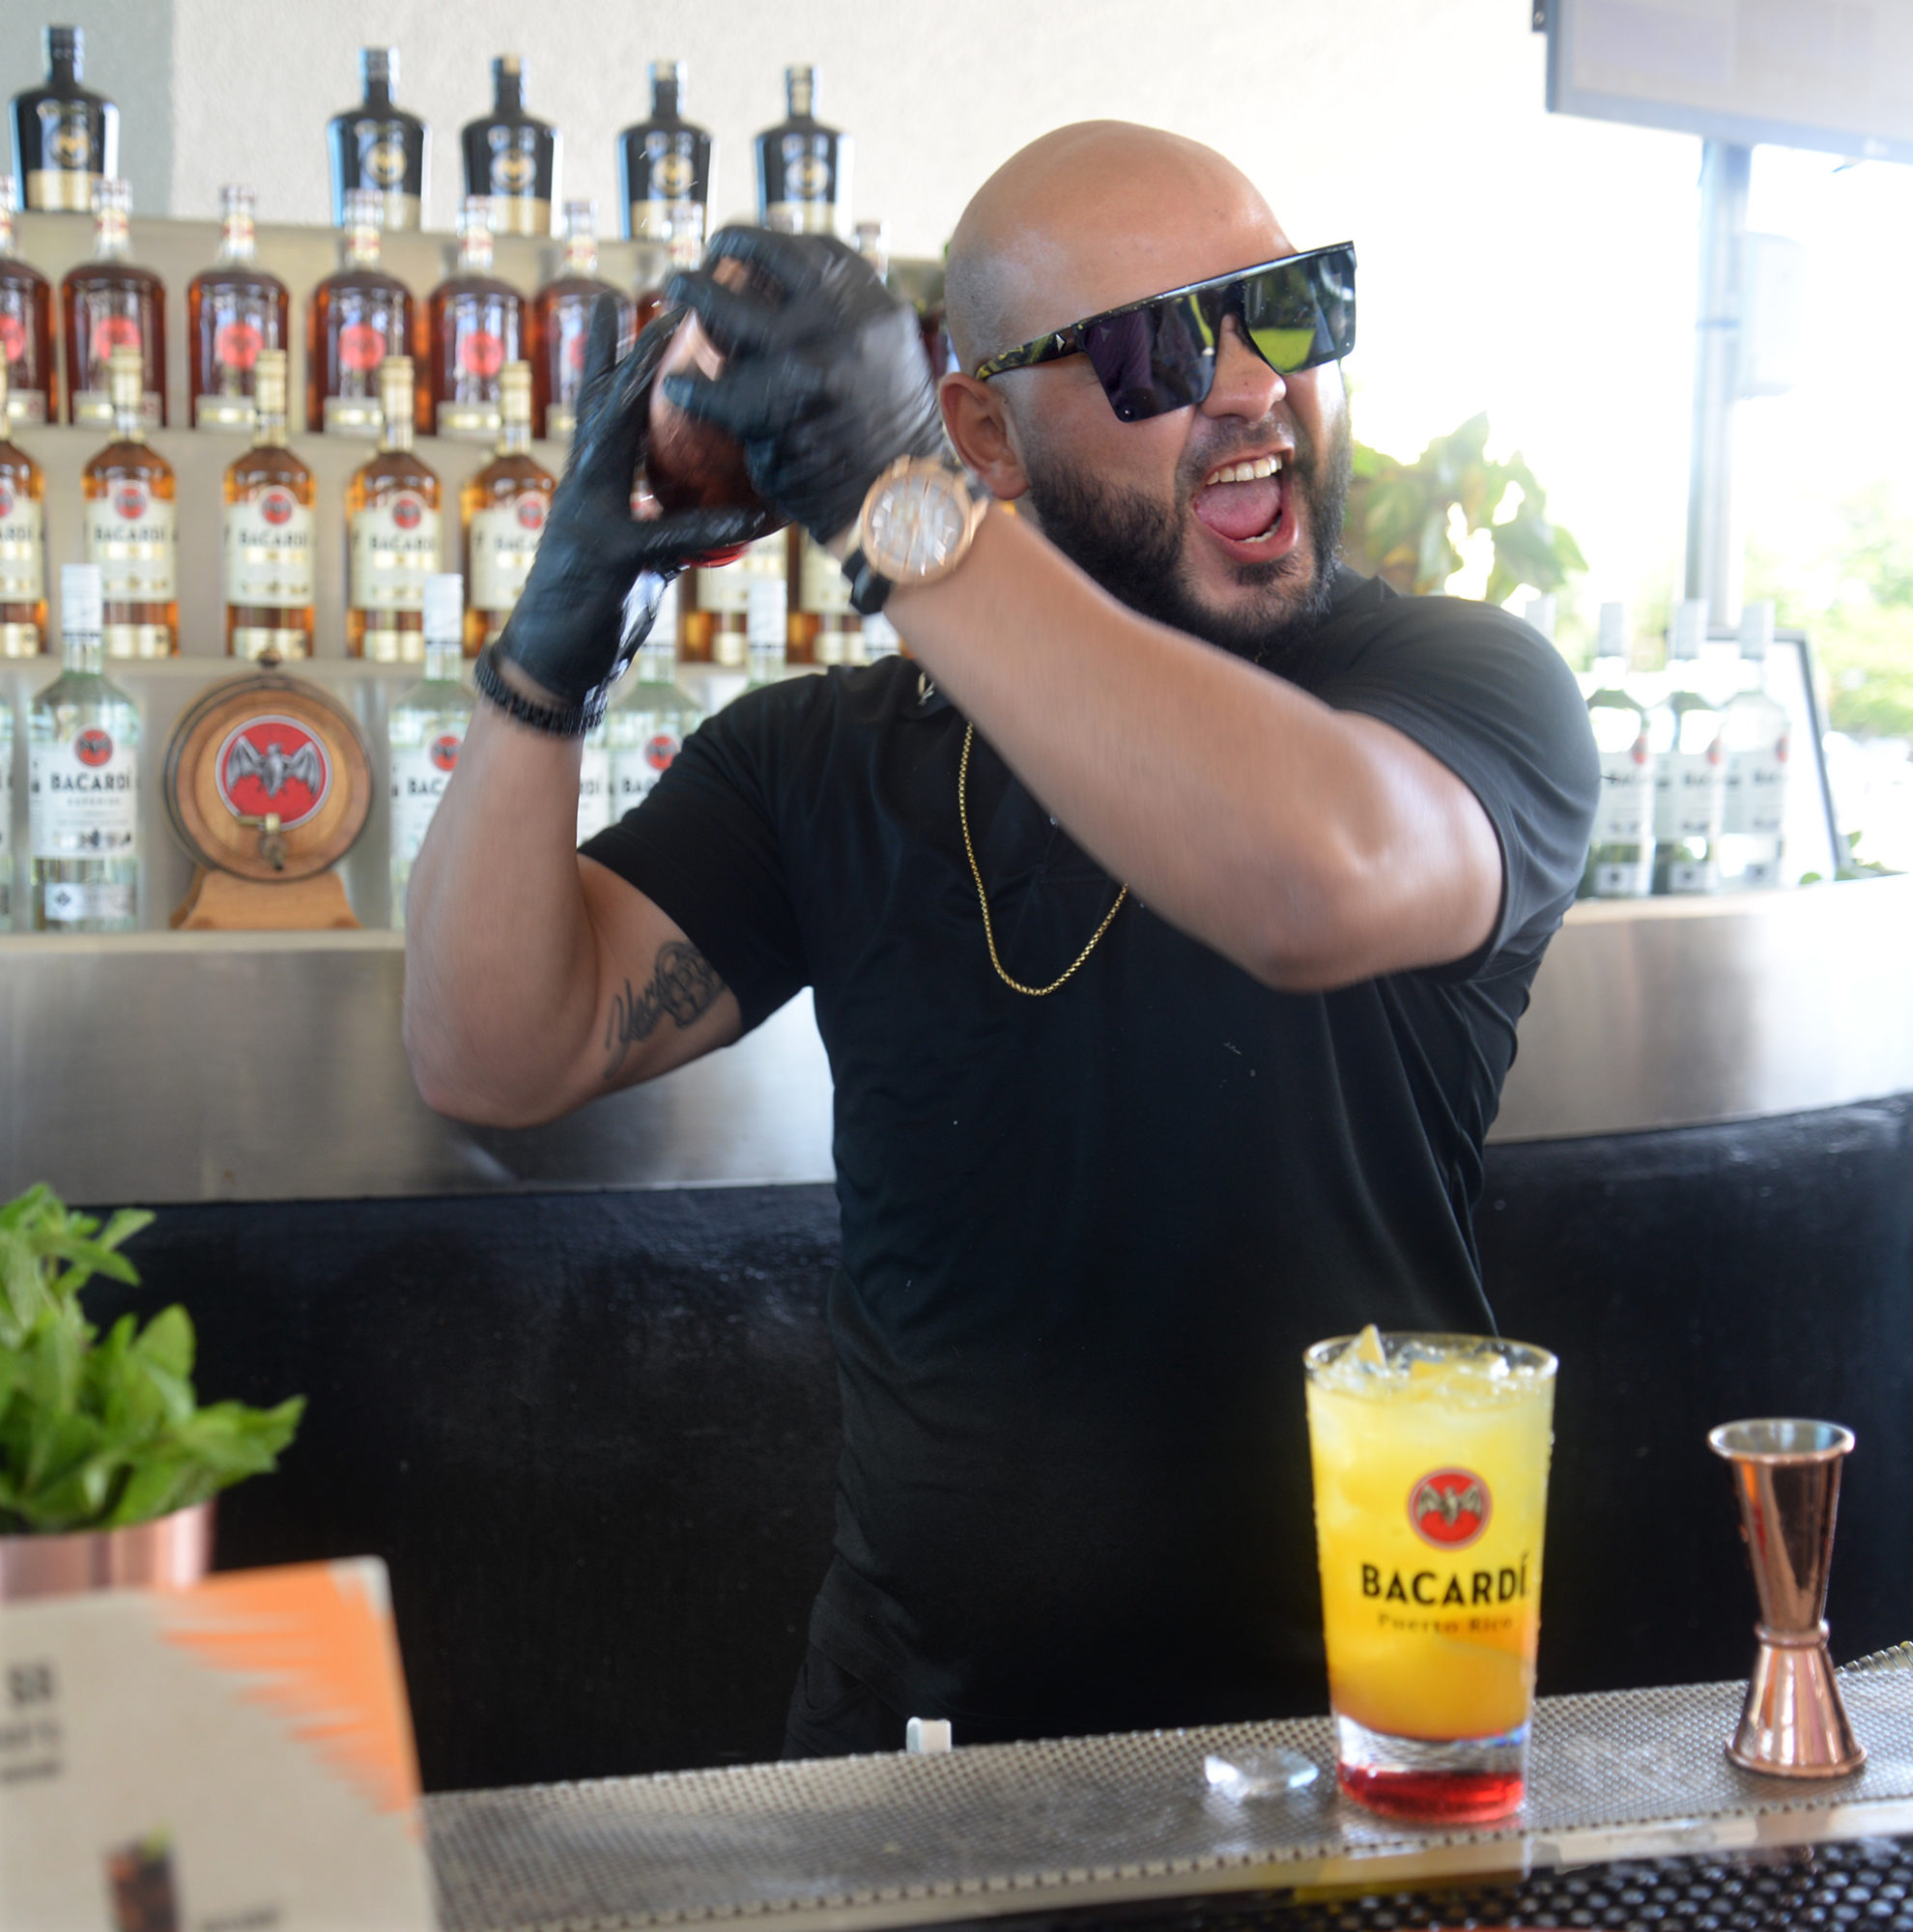 A Bacardi bartender plays to the crowd as he makes a Rum Sunrise at a visitor's area outside the Bacardi distillery. Photo by Sarah Price